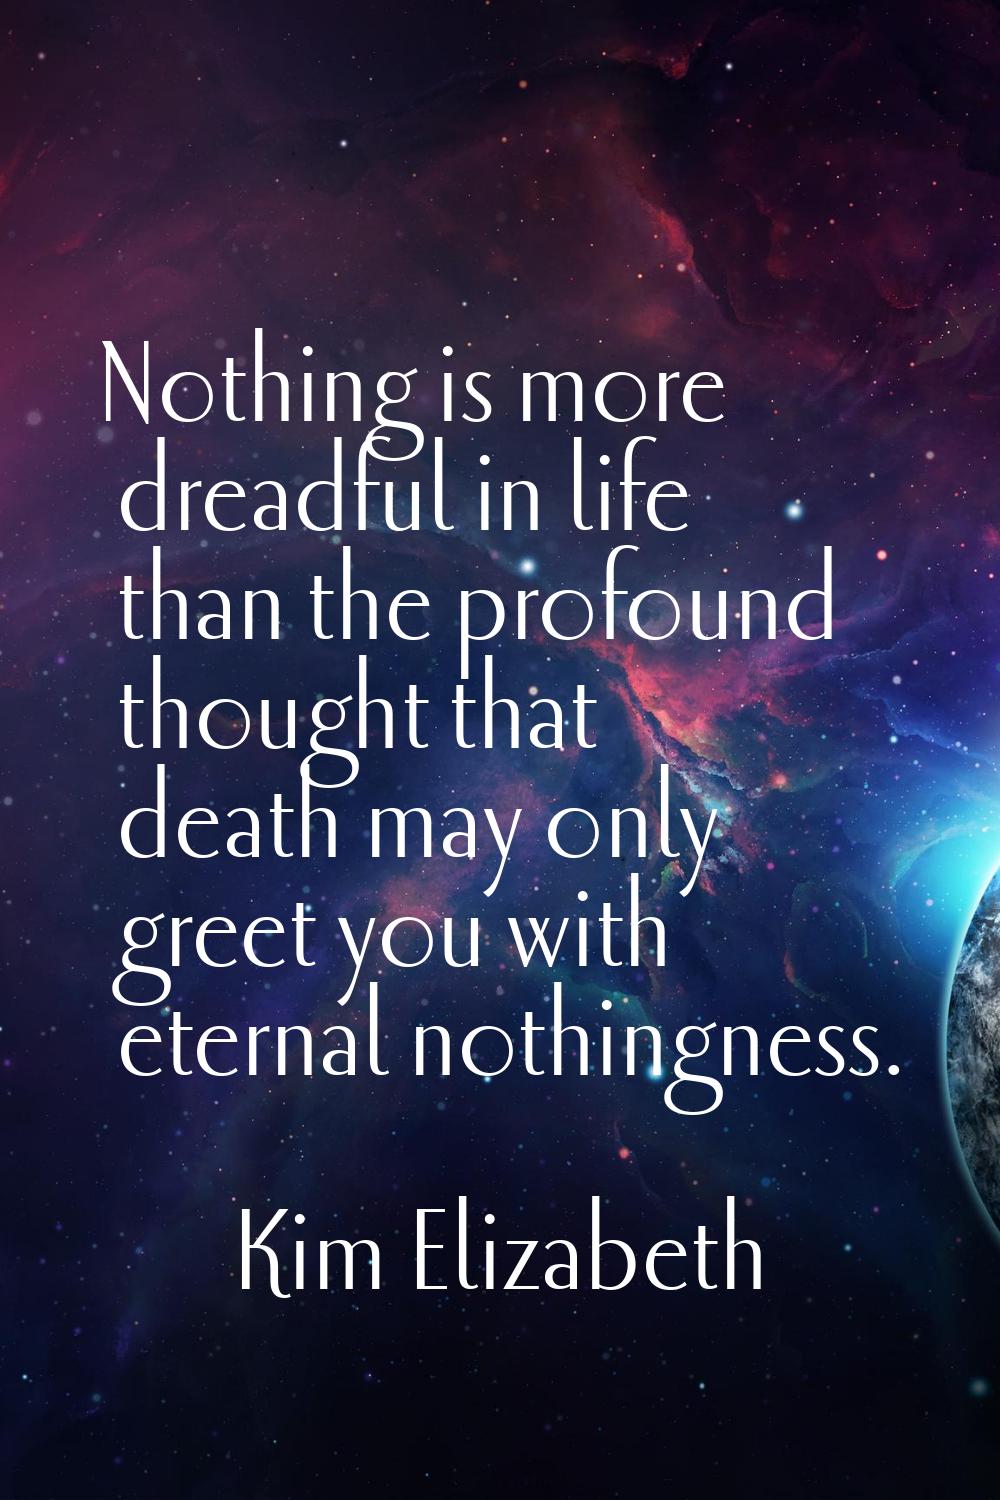 Nothing is more dreadful in life than the profound thought that death may only greet you with etern